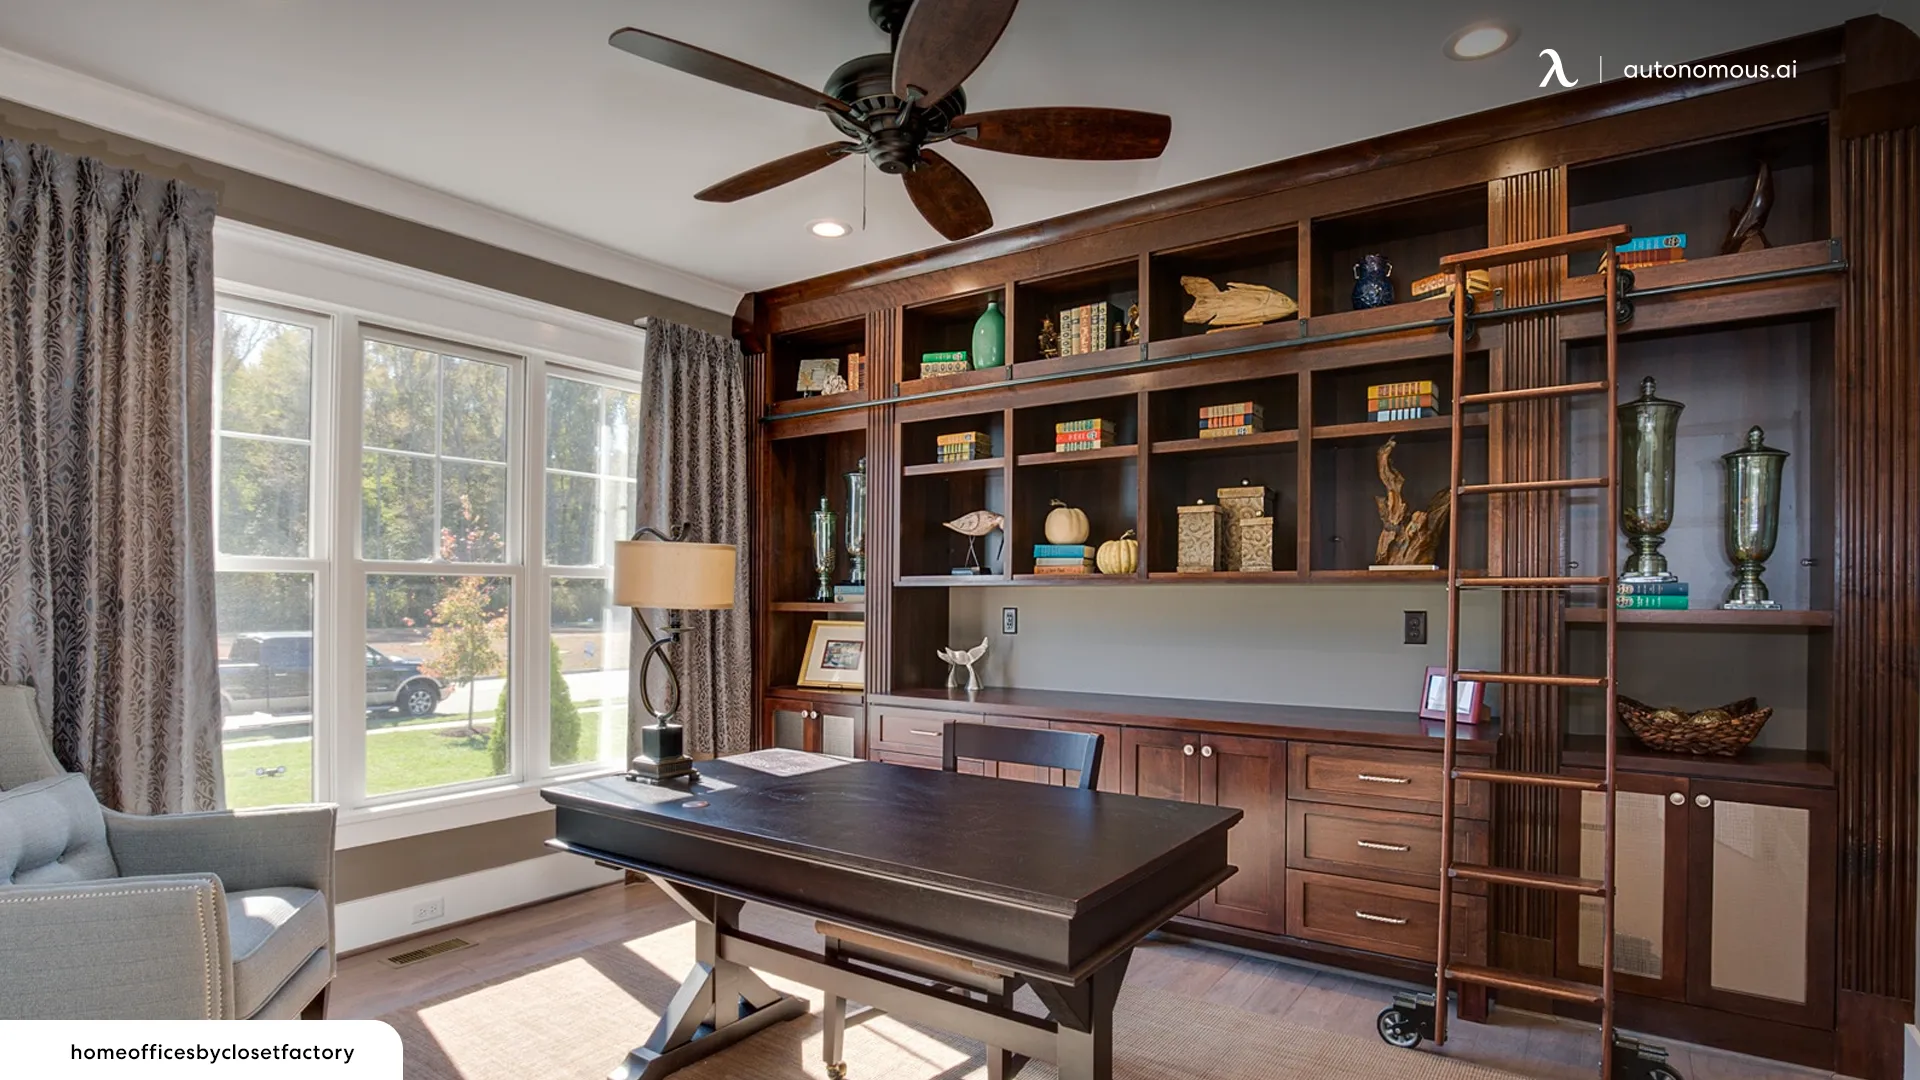 Customize storage solutions - classic home office design